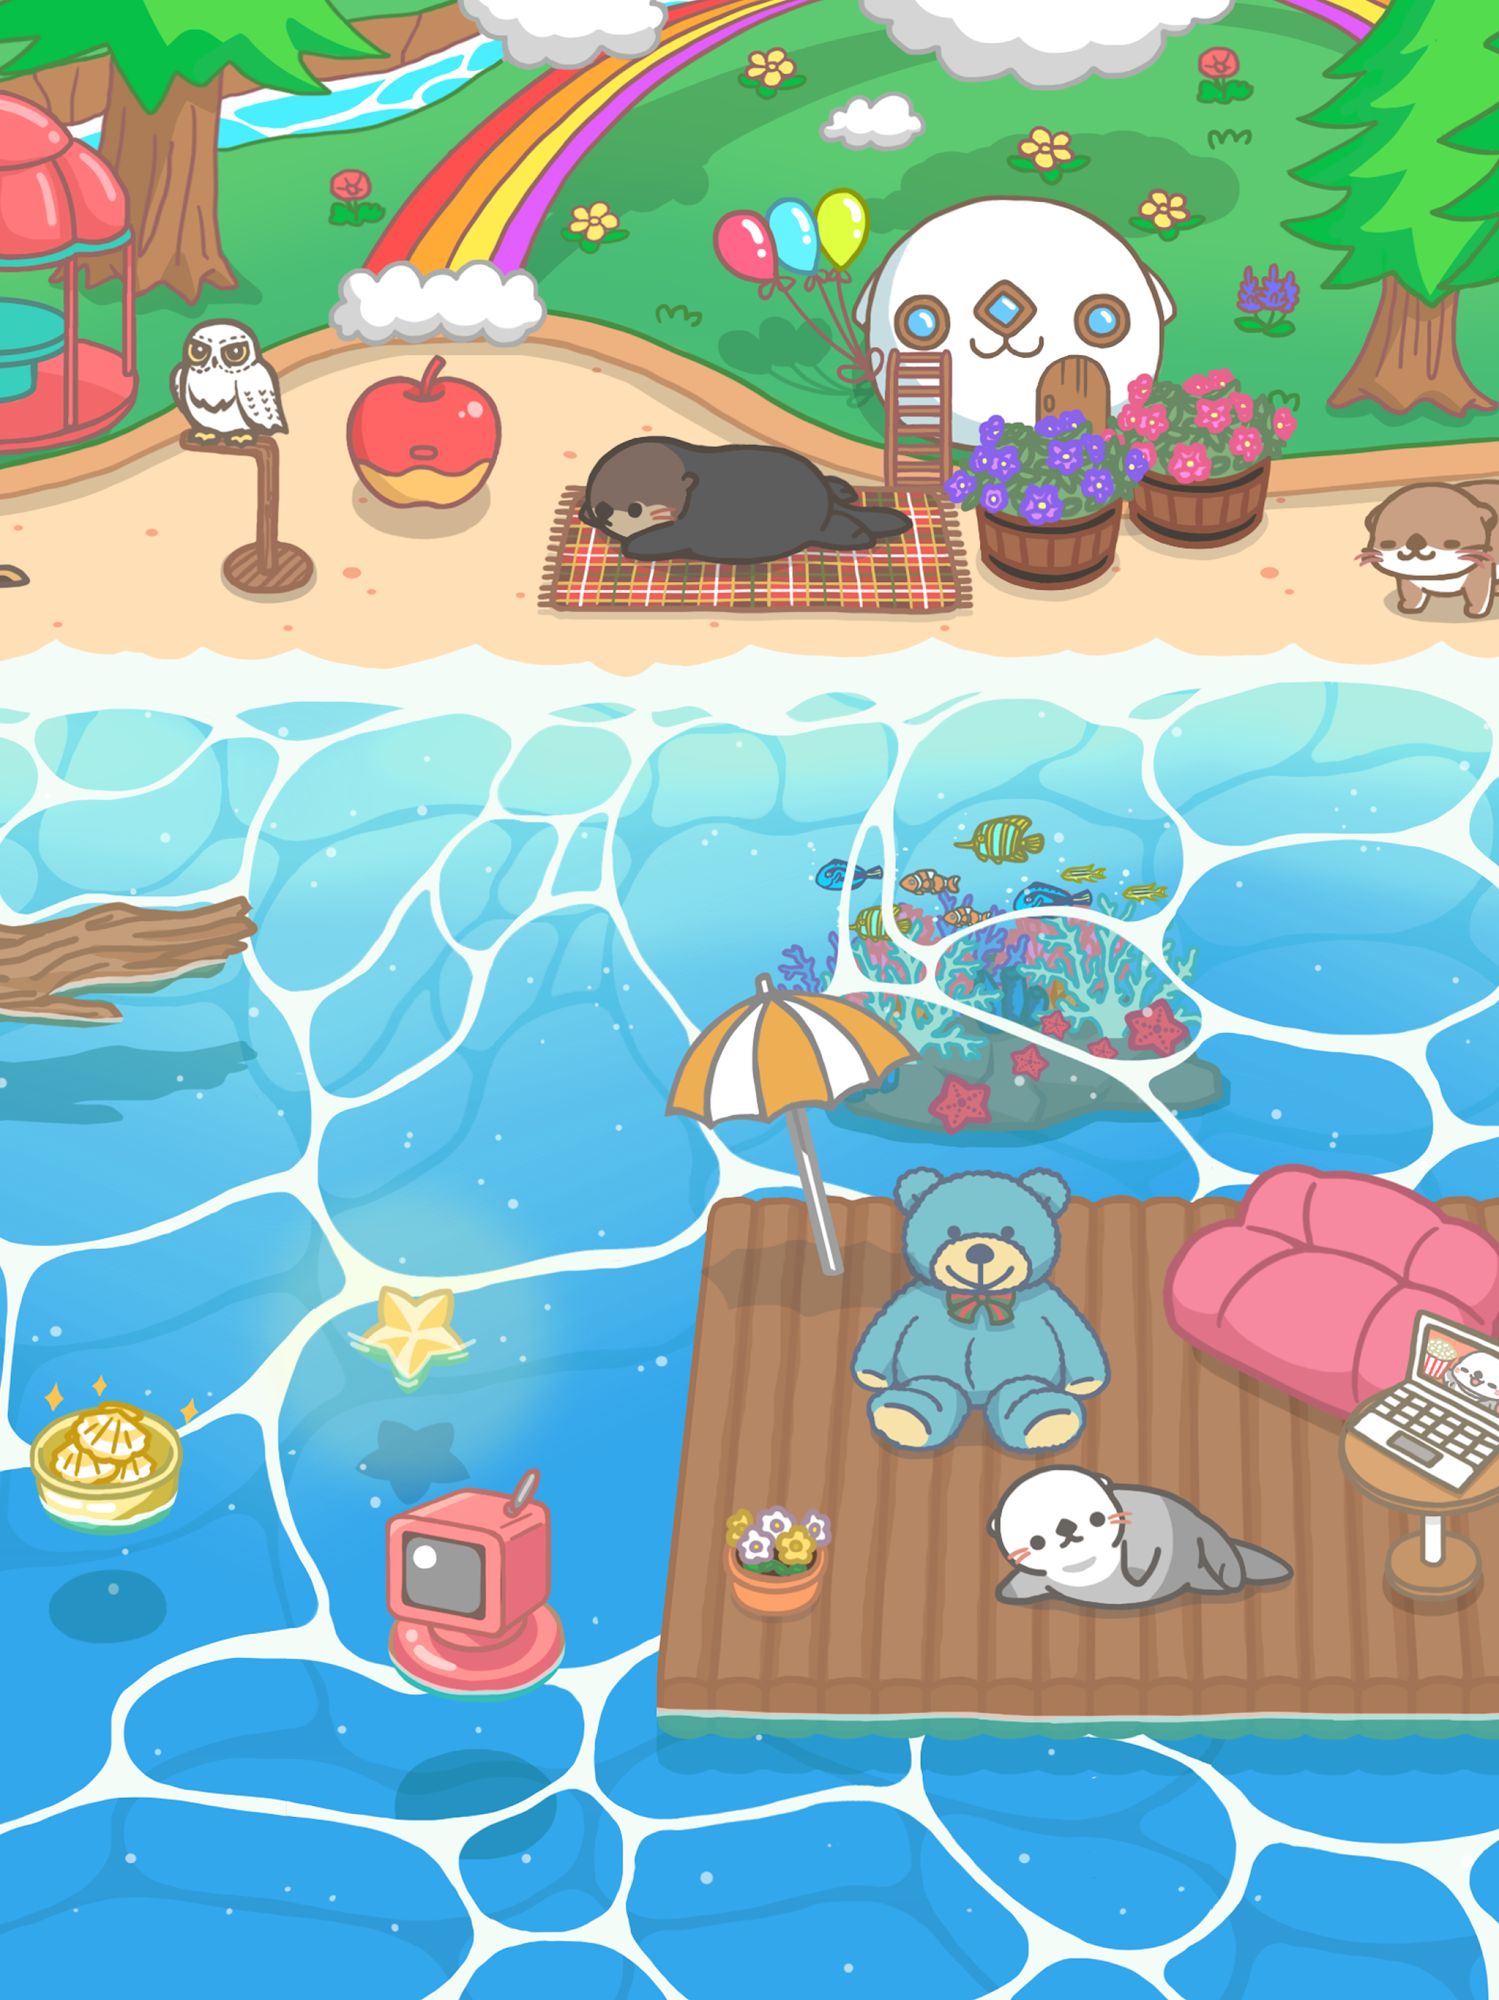 Rakko Ukabe - Let's call cute sea otters! für Android